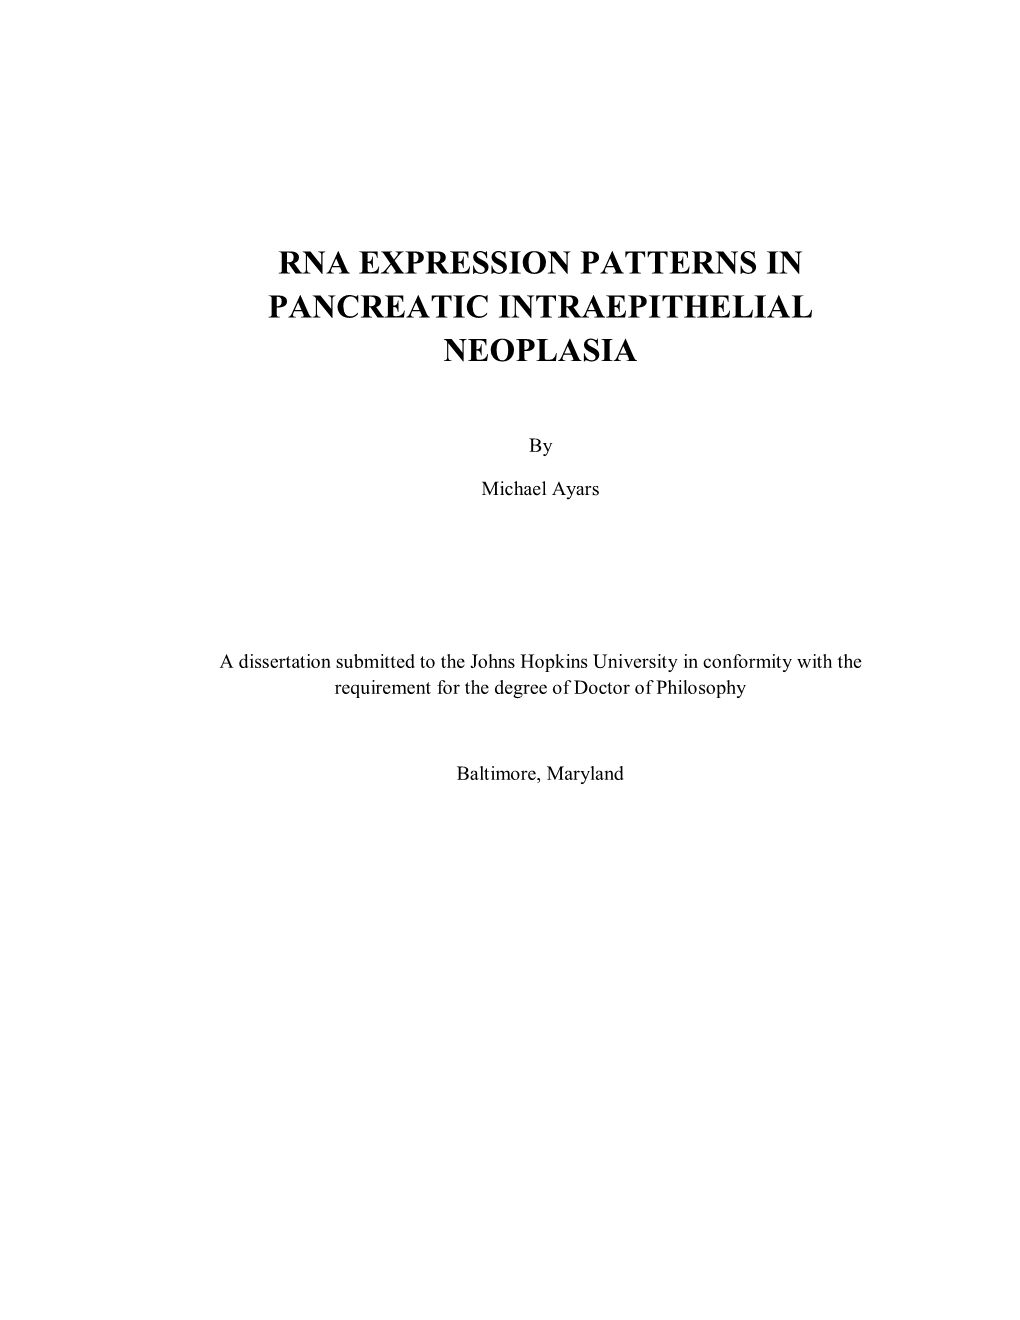 Rna Expression Patterns in Pancreatic Intraepithelial Neoplasia